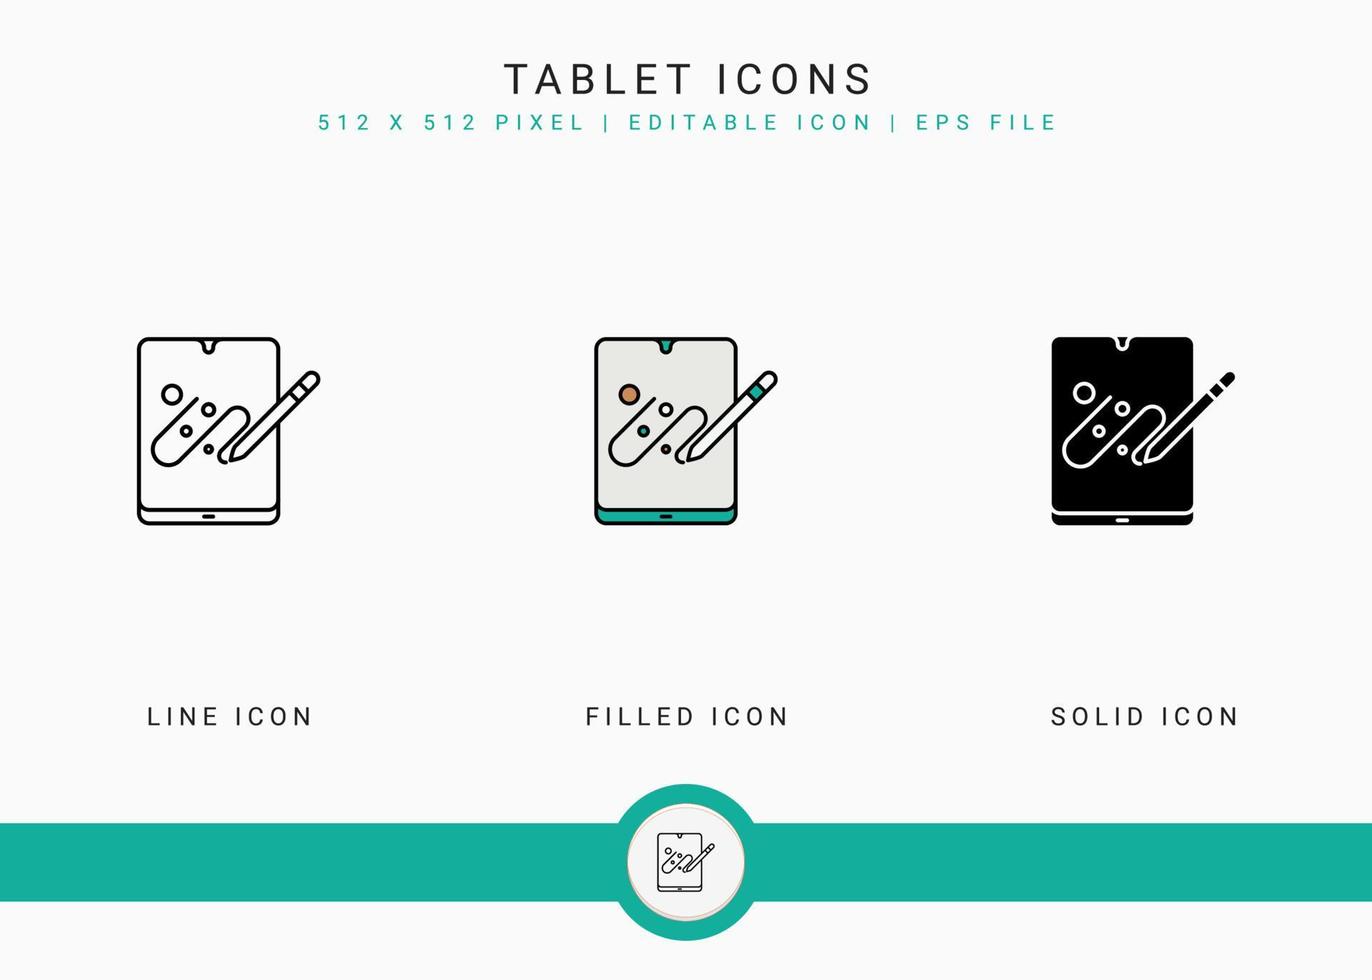 Tablet icons set vector illustration with solid icon line style. Electronics smart device concept. Editable stroke icon on isolated background for web design, user interface, and mobile app